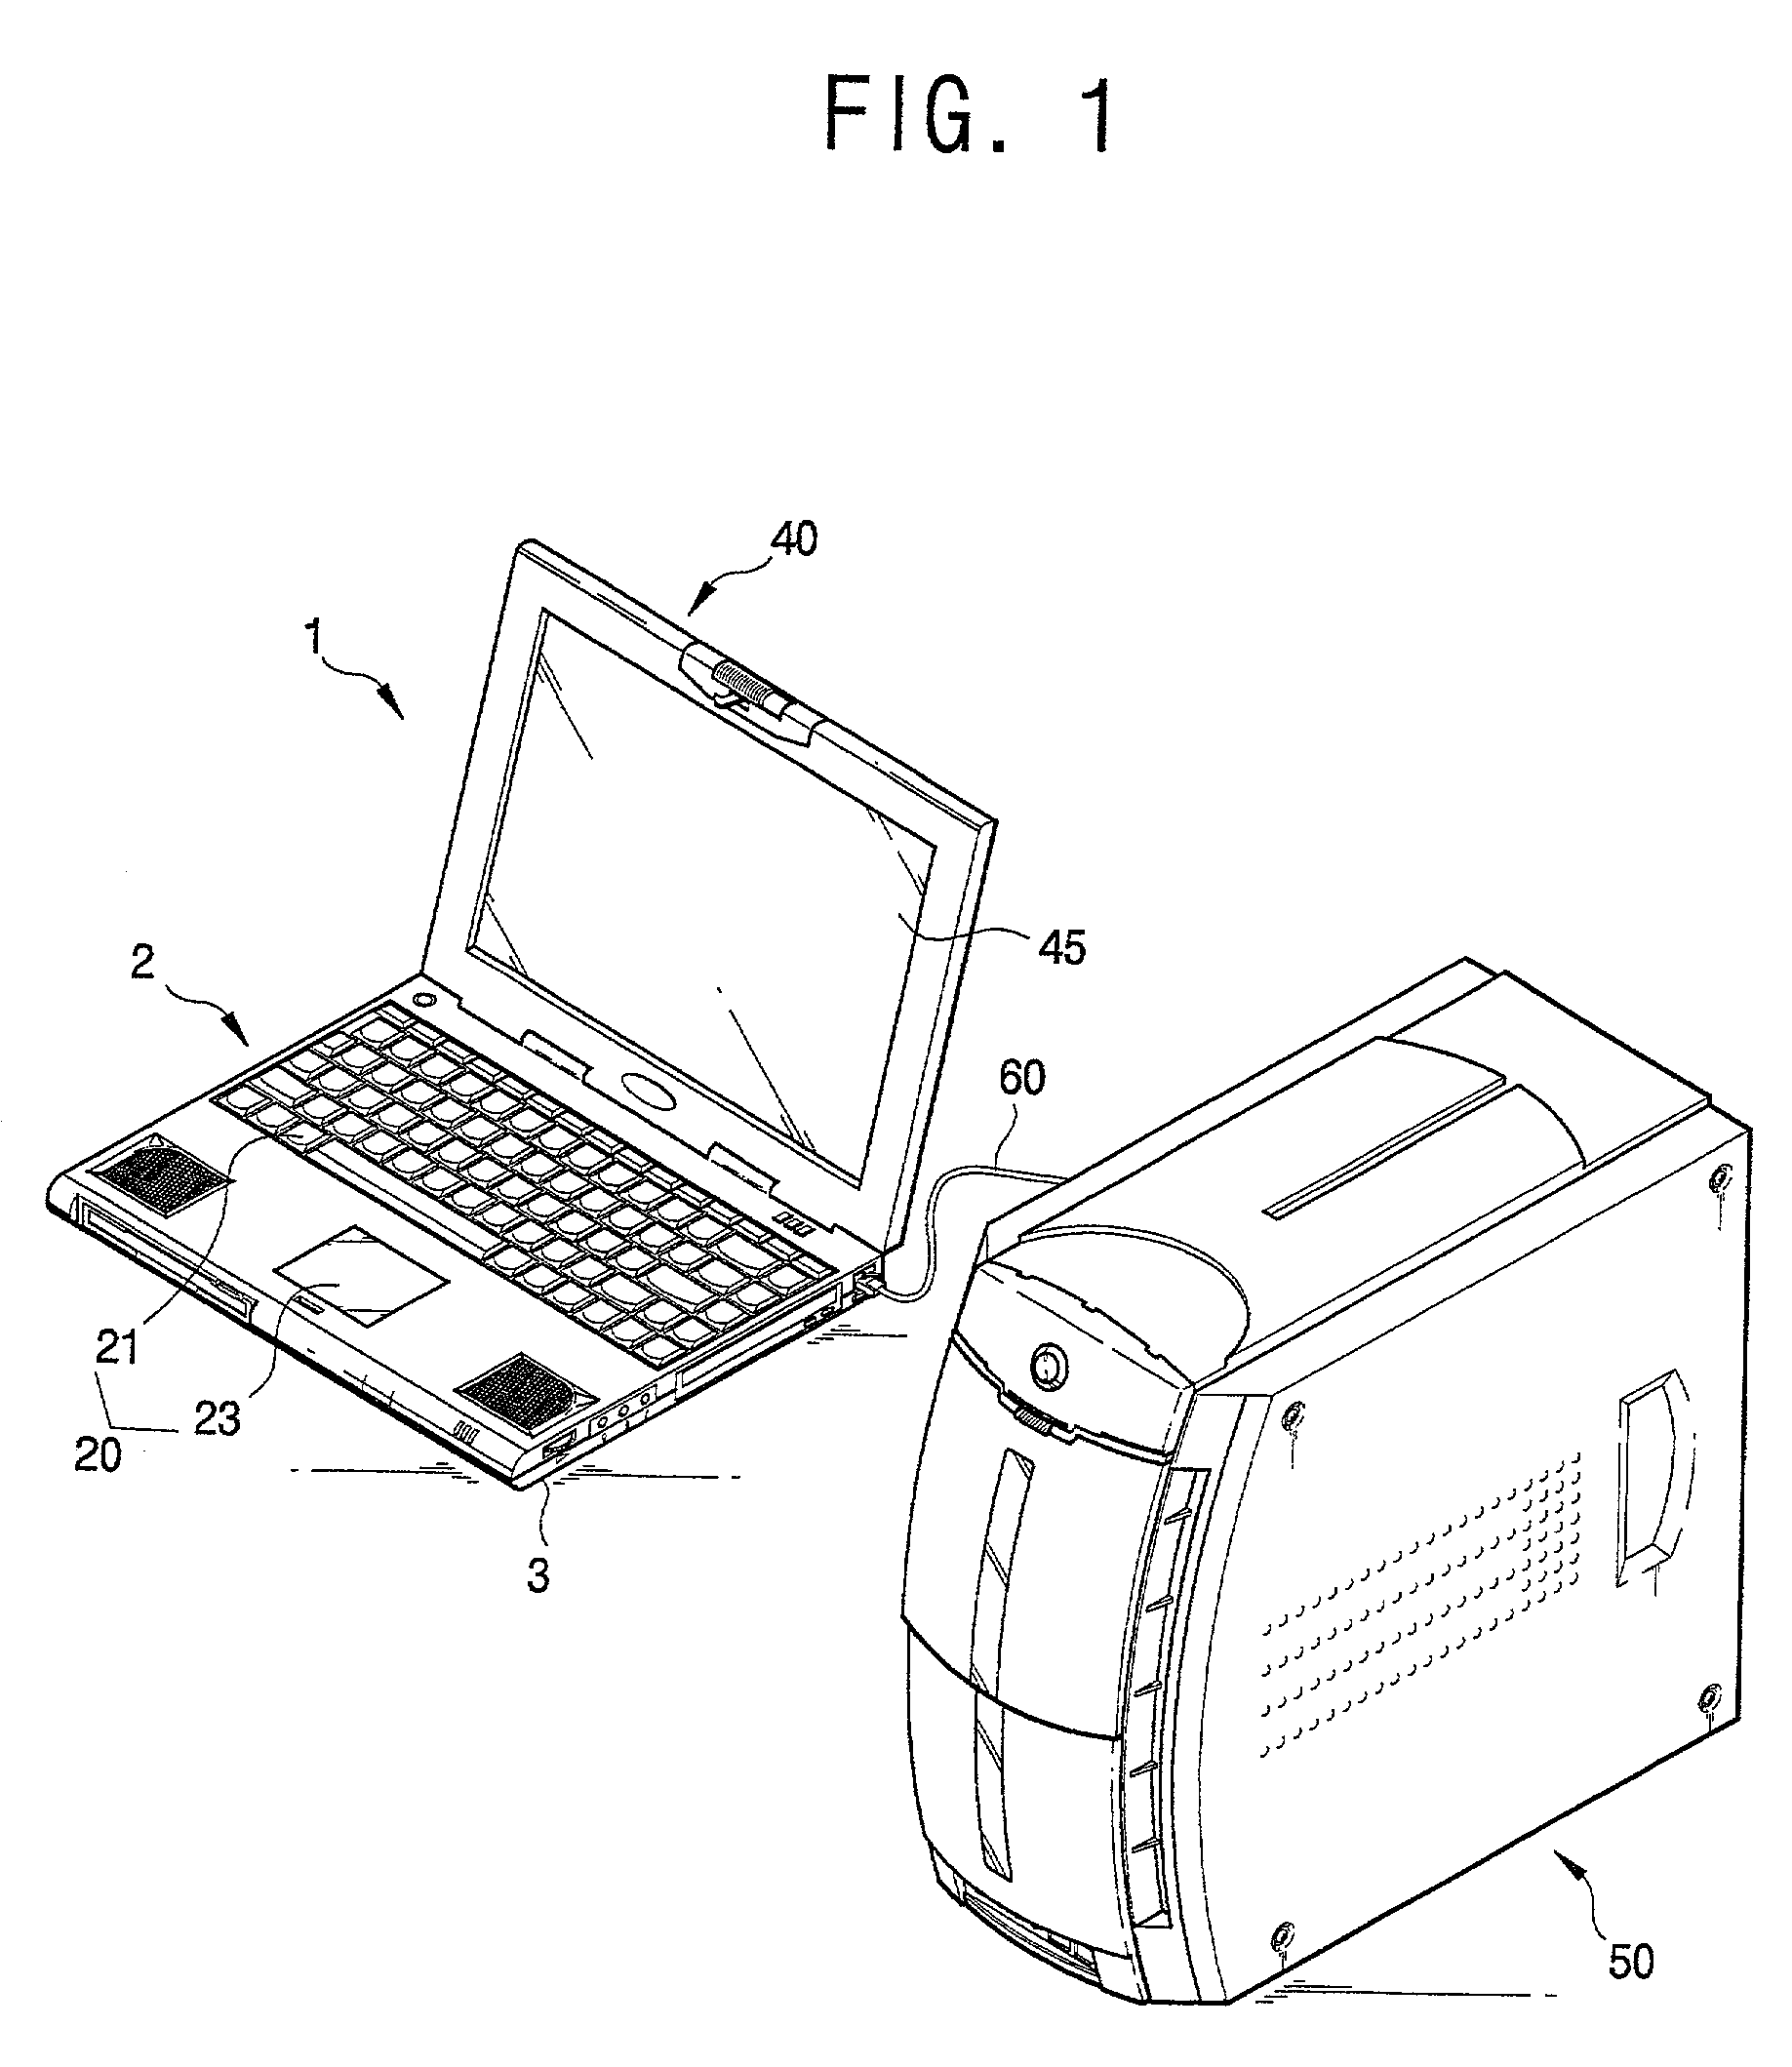 Portable computer system having LCD monitor for selectively receiving video signals from external video signal input from external computer